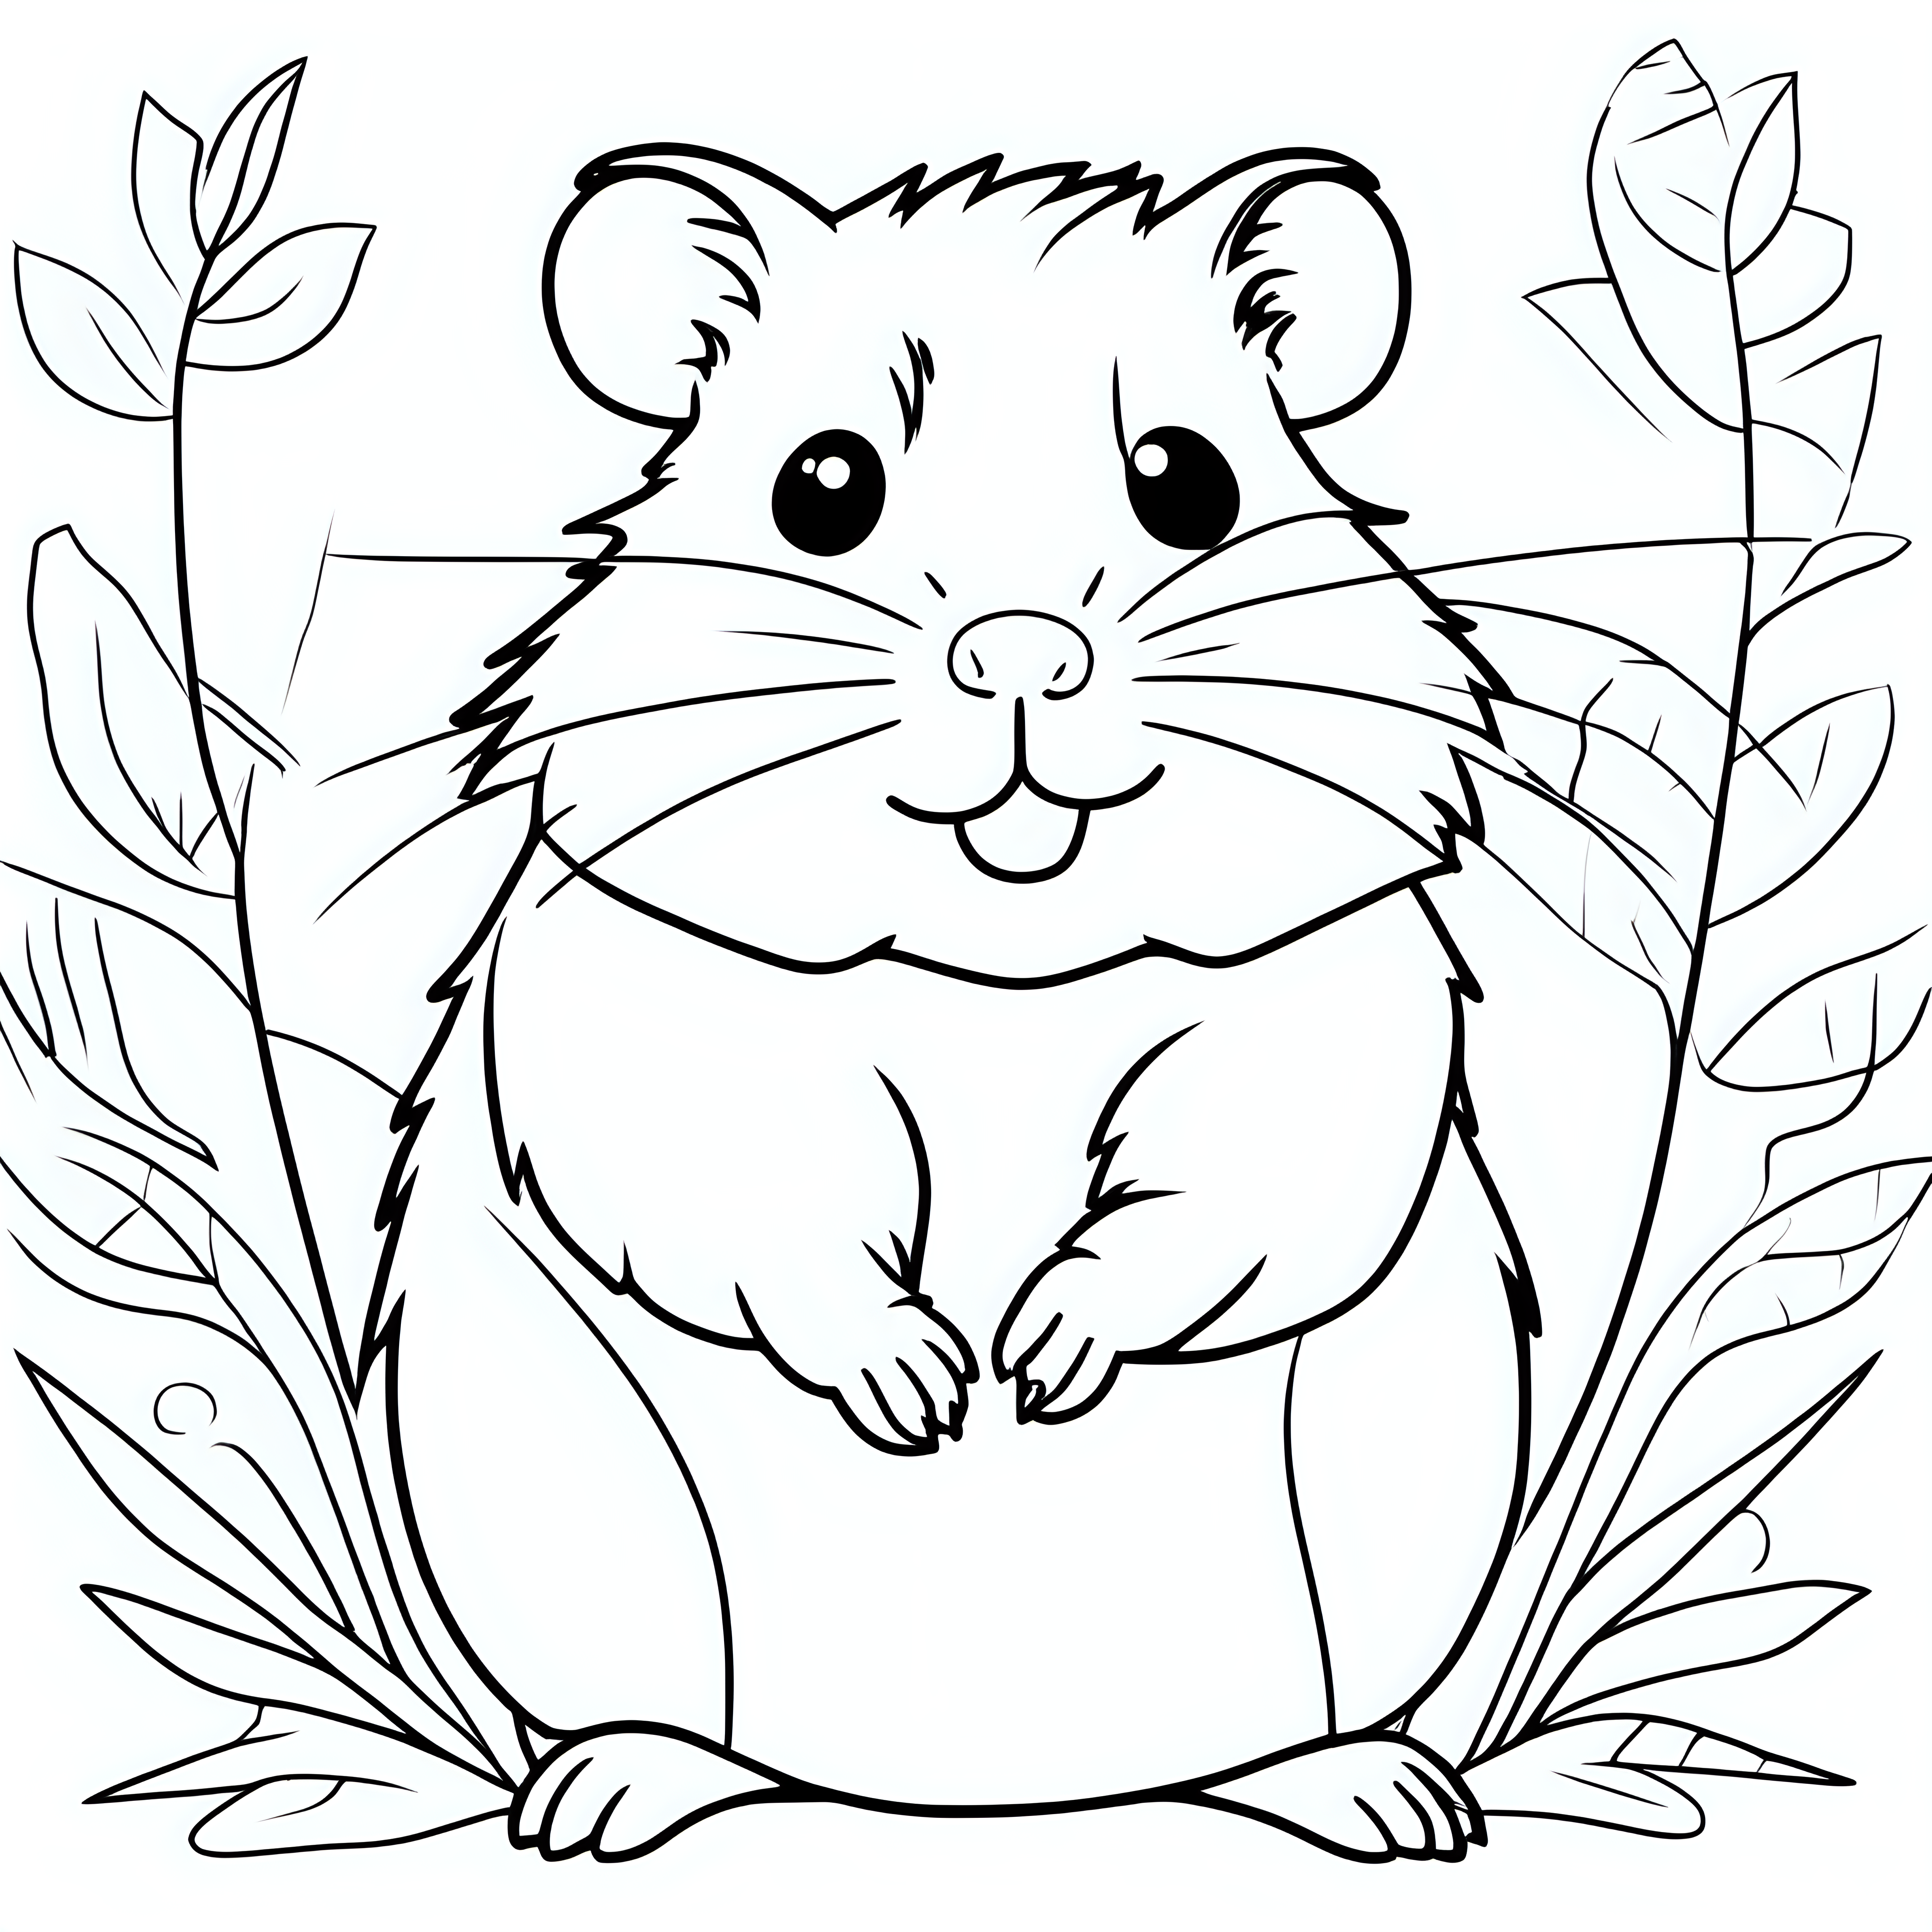 draw a cute hamister animal with only the outline in black for a coloring book for kids